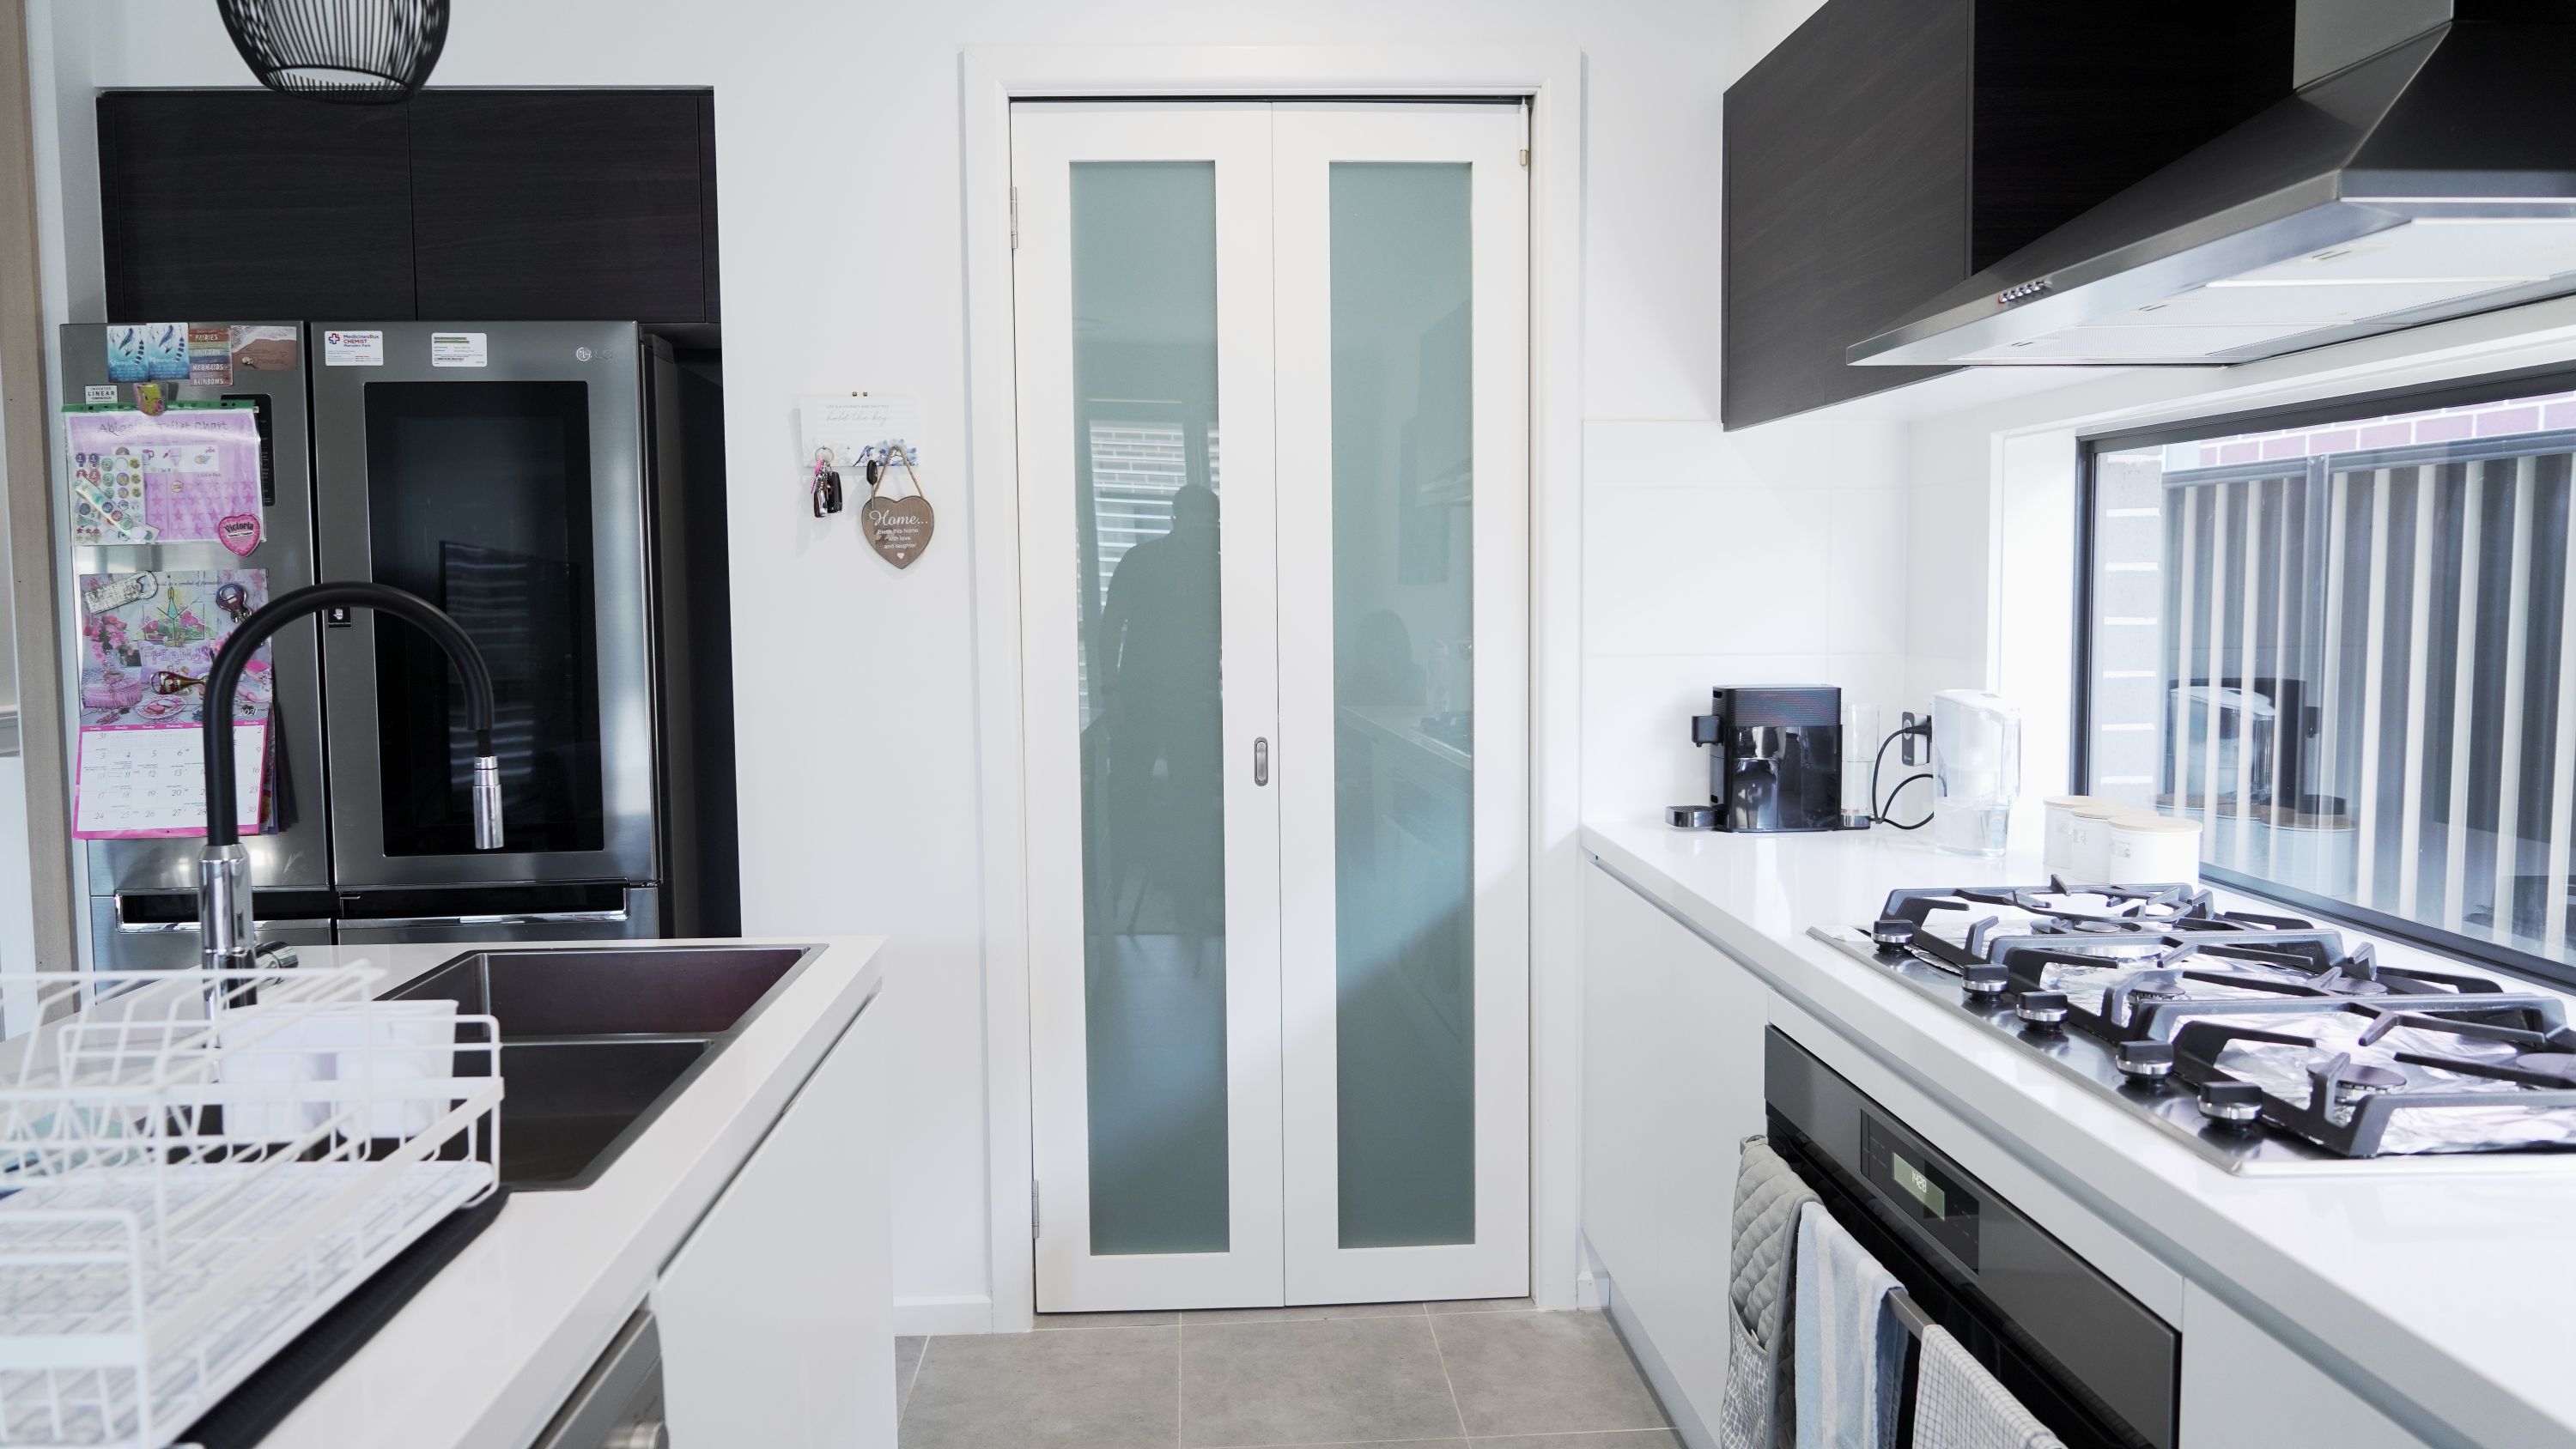 2 Panel bifold door with translucent glass in pantry painted white